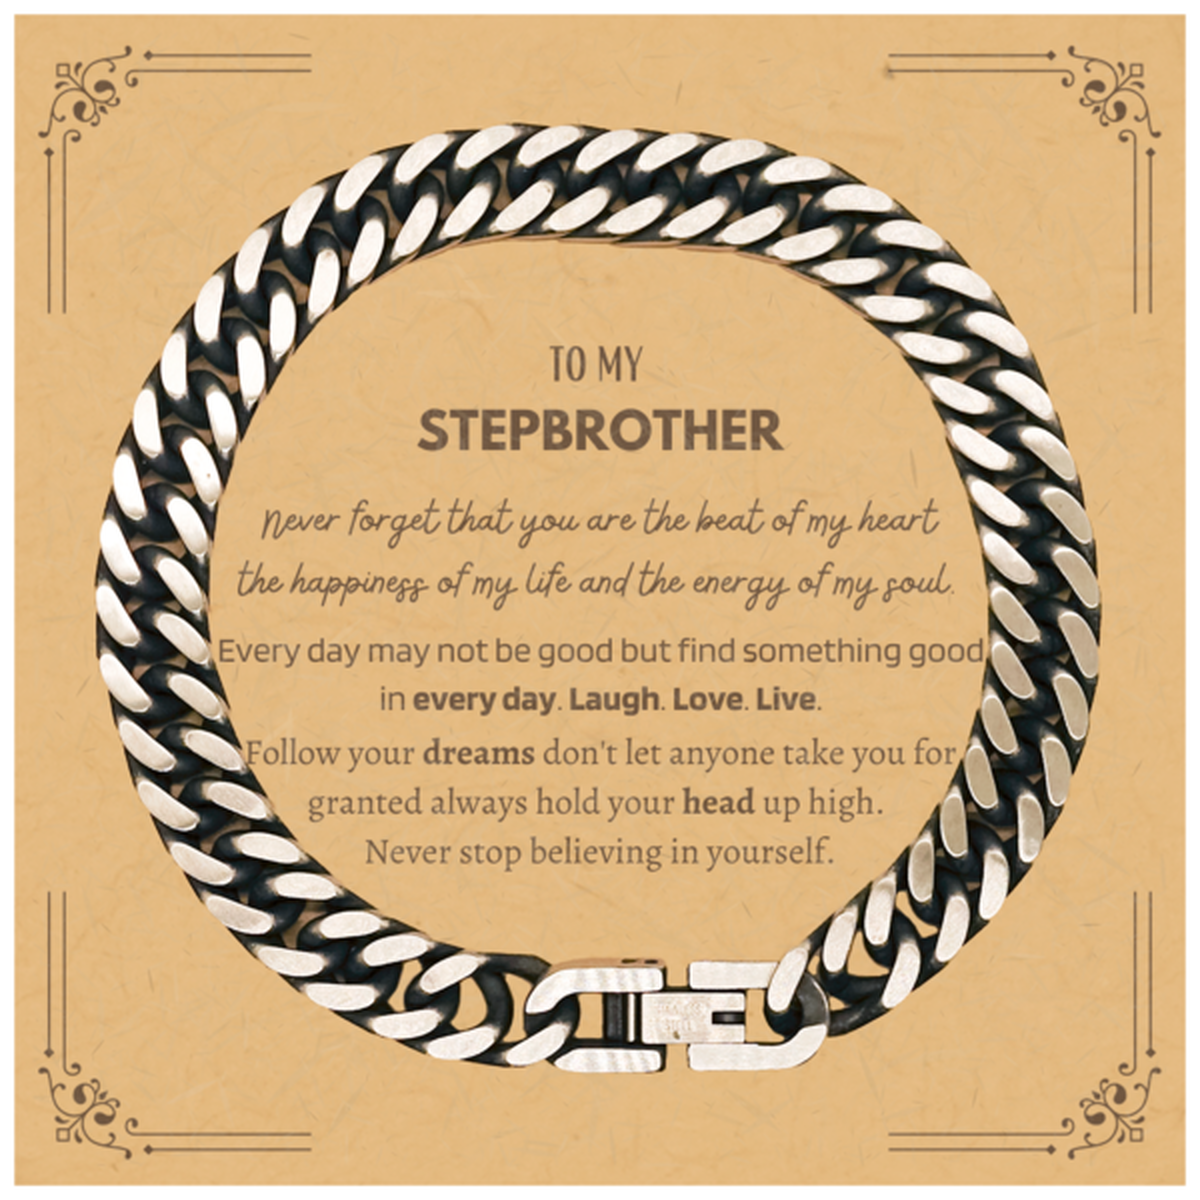 To My Stepbrother Message Card Gifts, Christmas Stepbrother Cuban Link Chain Bracelet Present, Birthday Unique Motivational For Stepbrother, To My Stepbrother Never forget that you are the beat of my heart the happiness of my life and the energy of my sou